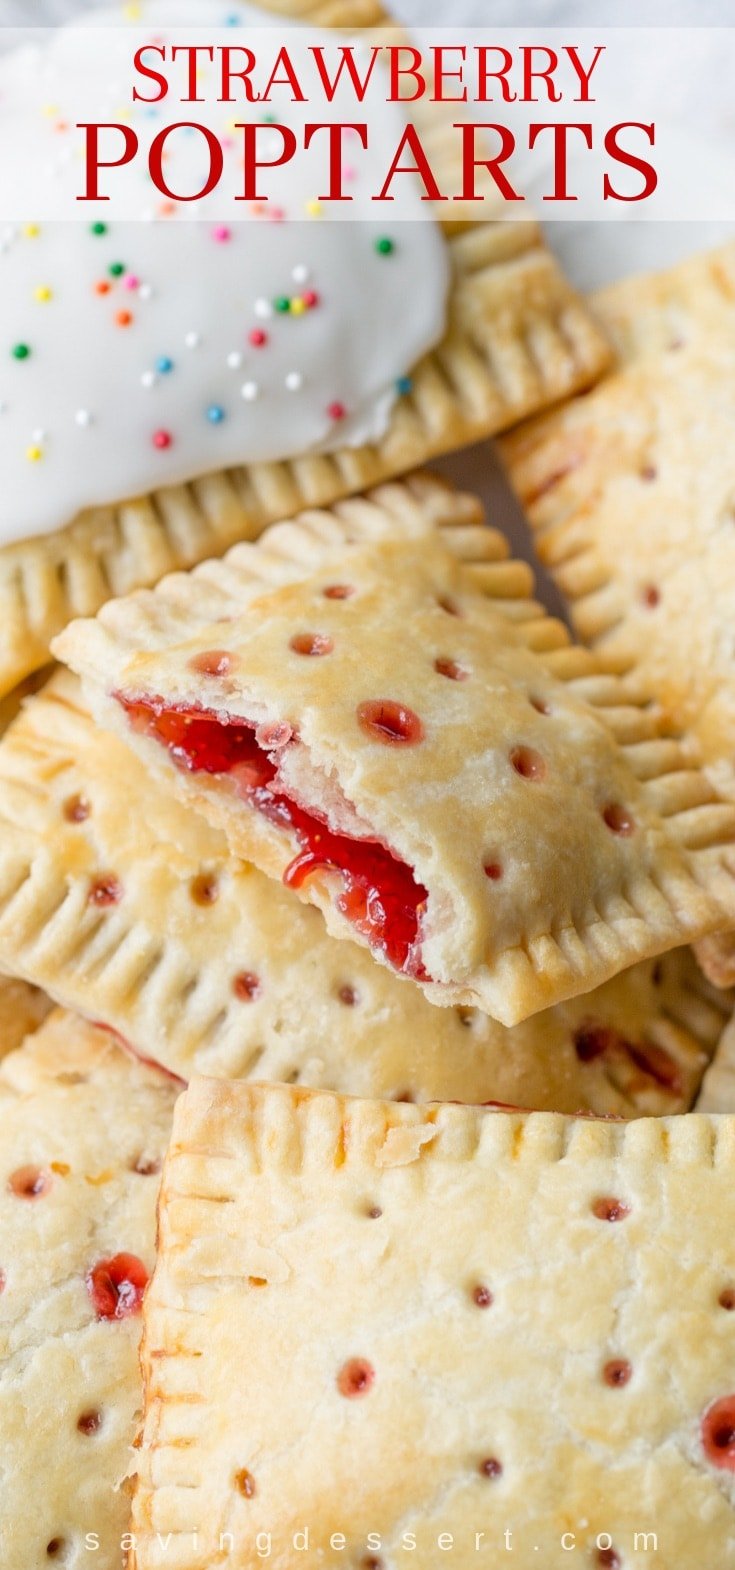 A stack of homemade pop-tarts with strawberry jam